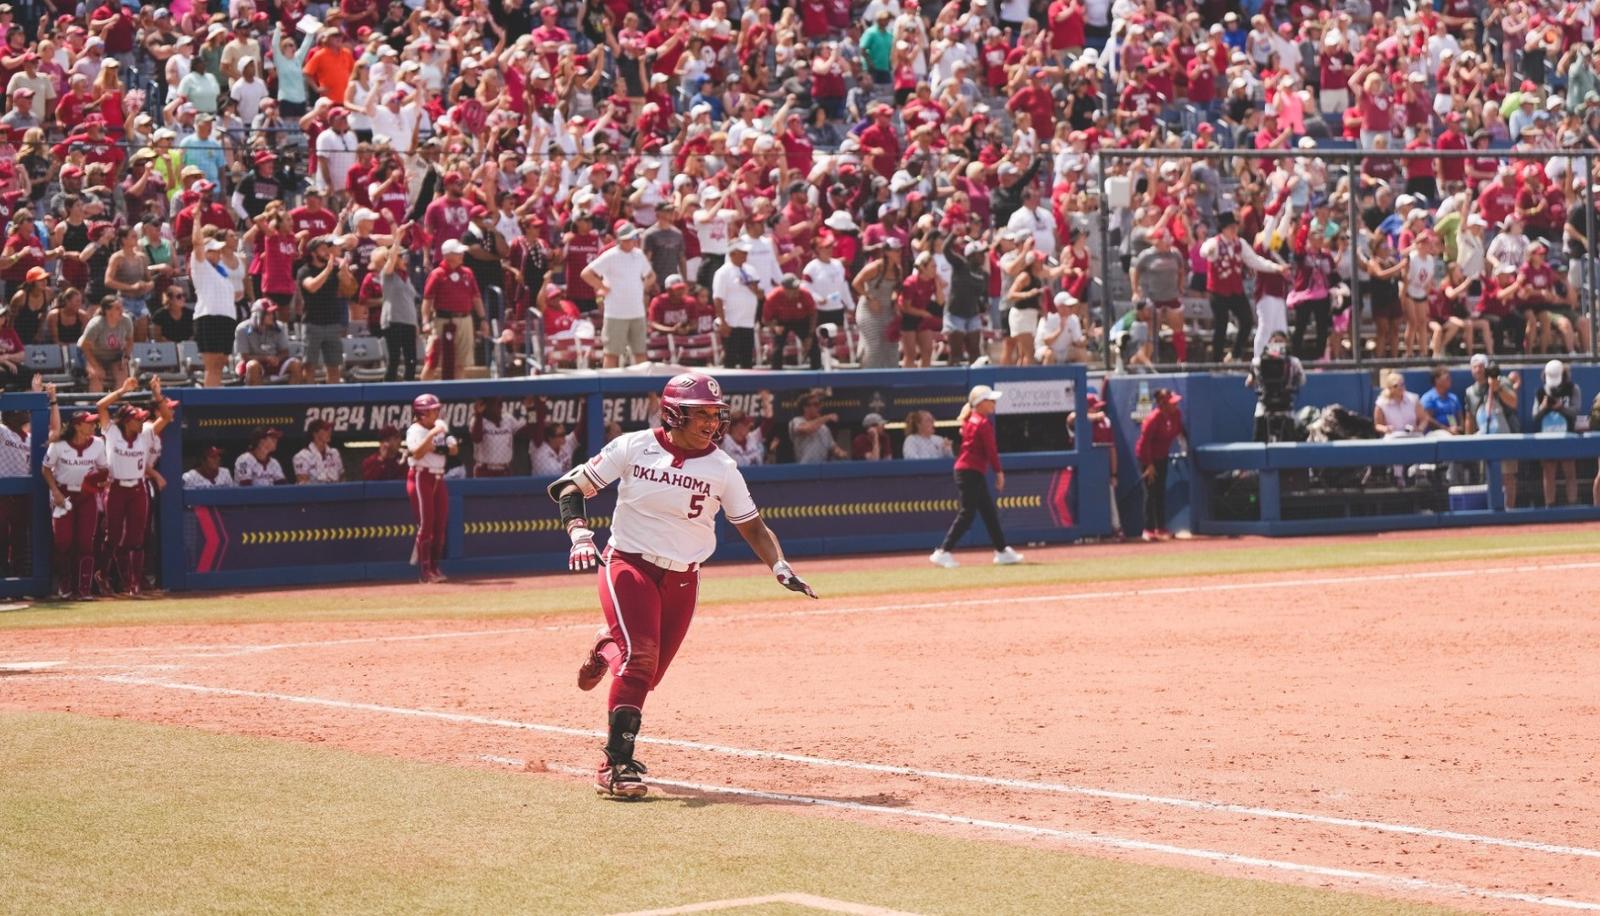 Oklahoma Sooners Take 1-0 Lead in Women's College World Series Championship Series Against Texas Longhorns